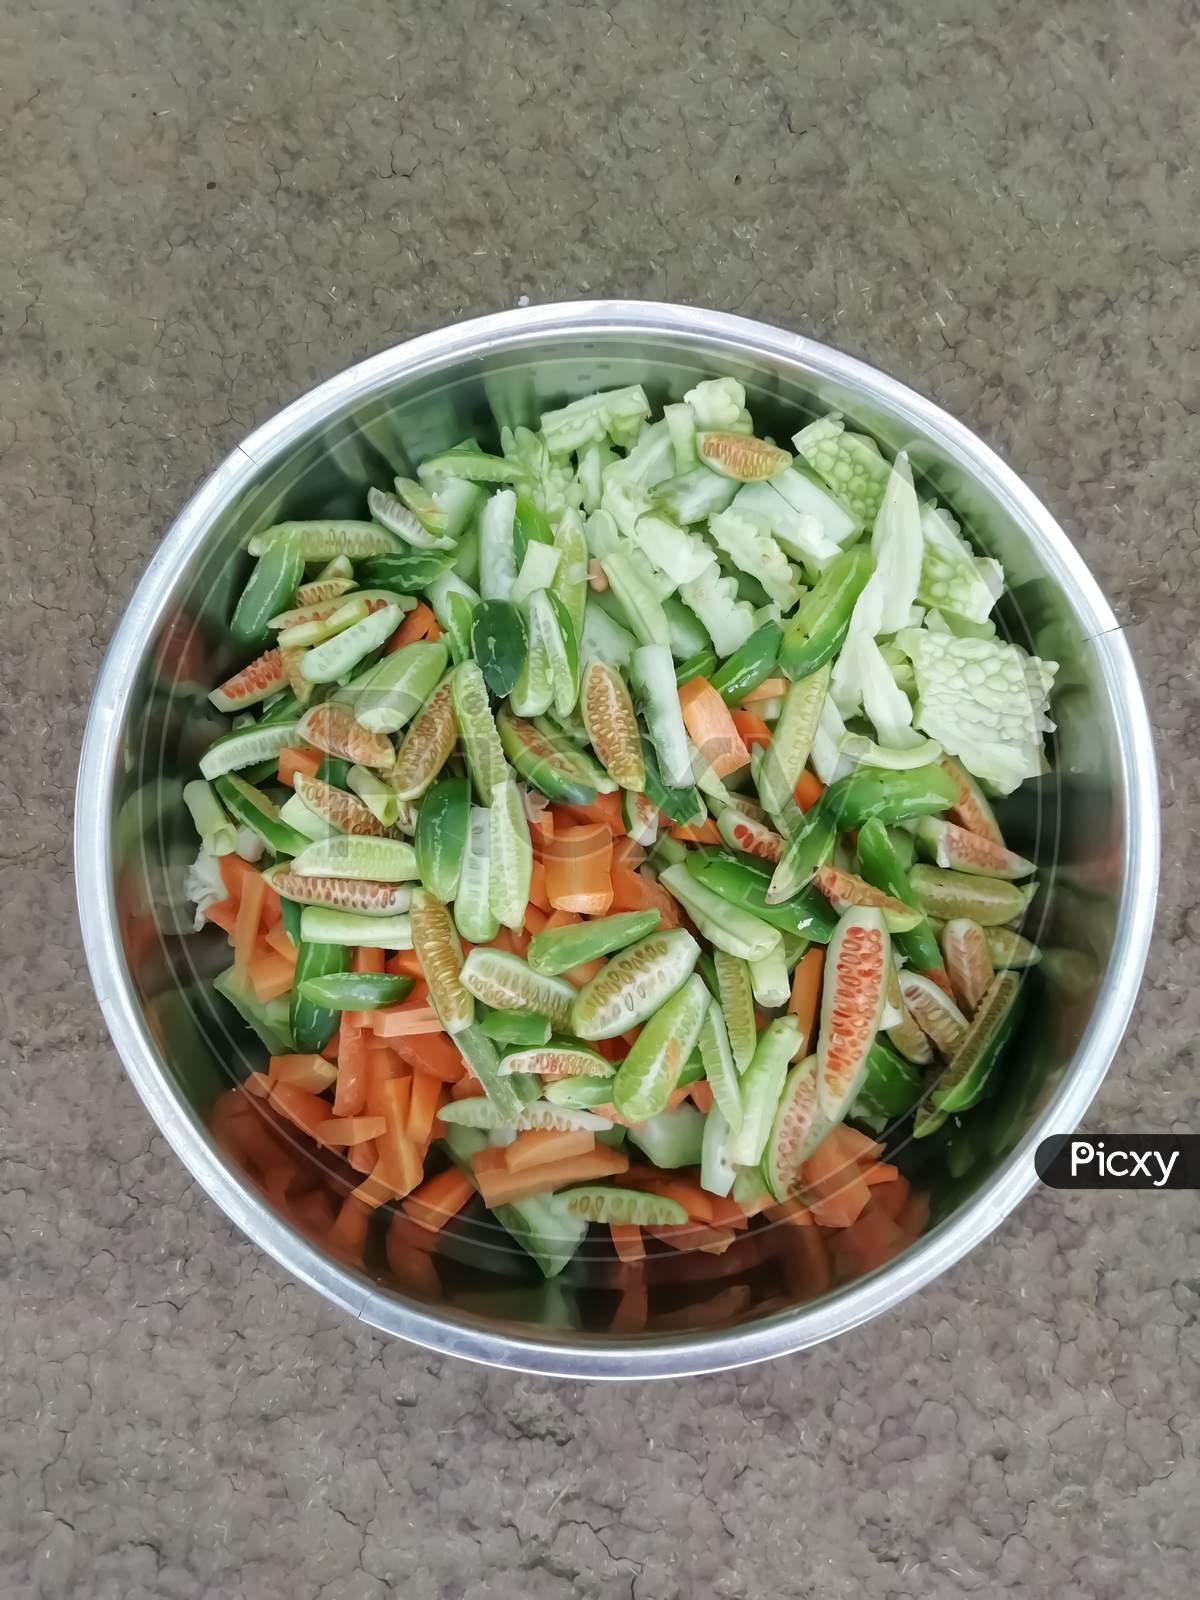 Closeup View Of Small Vegetable Pieces In A Bowl